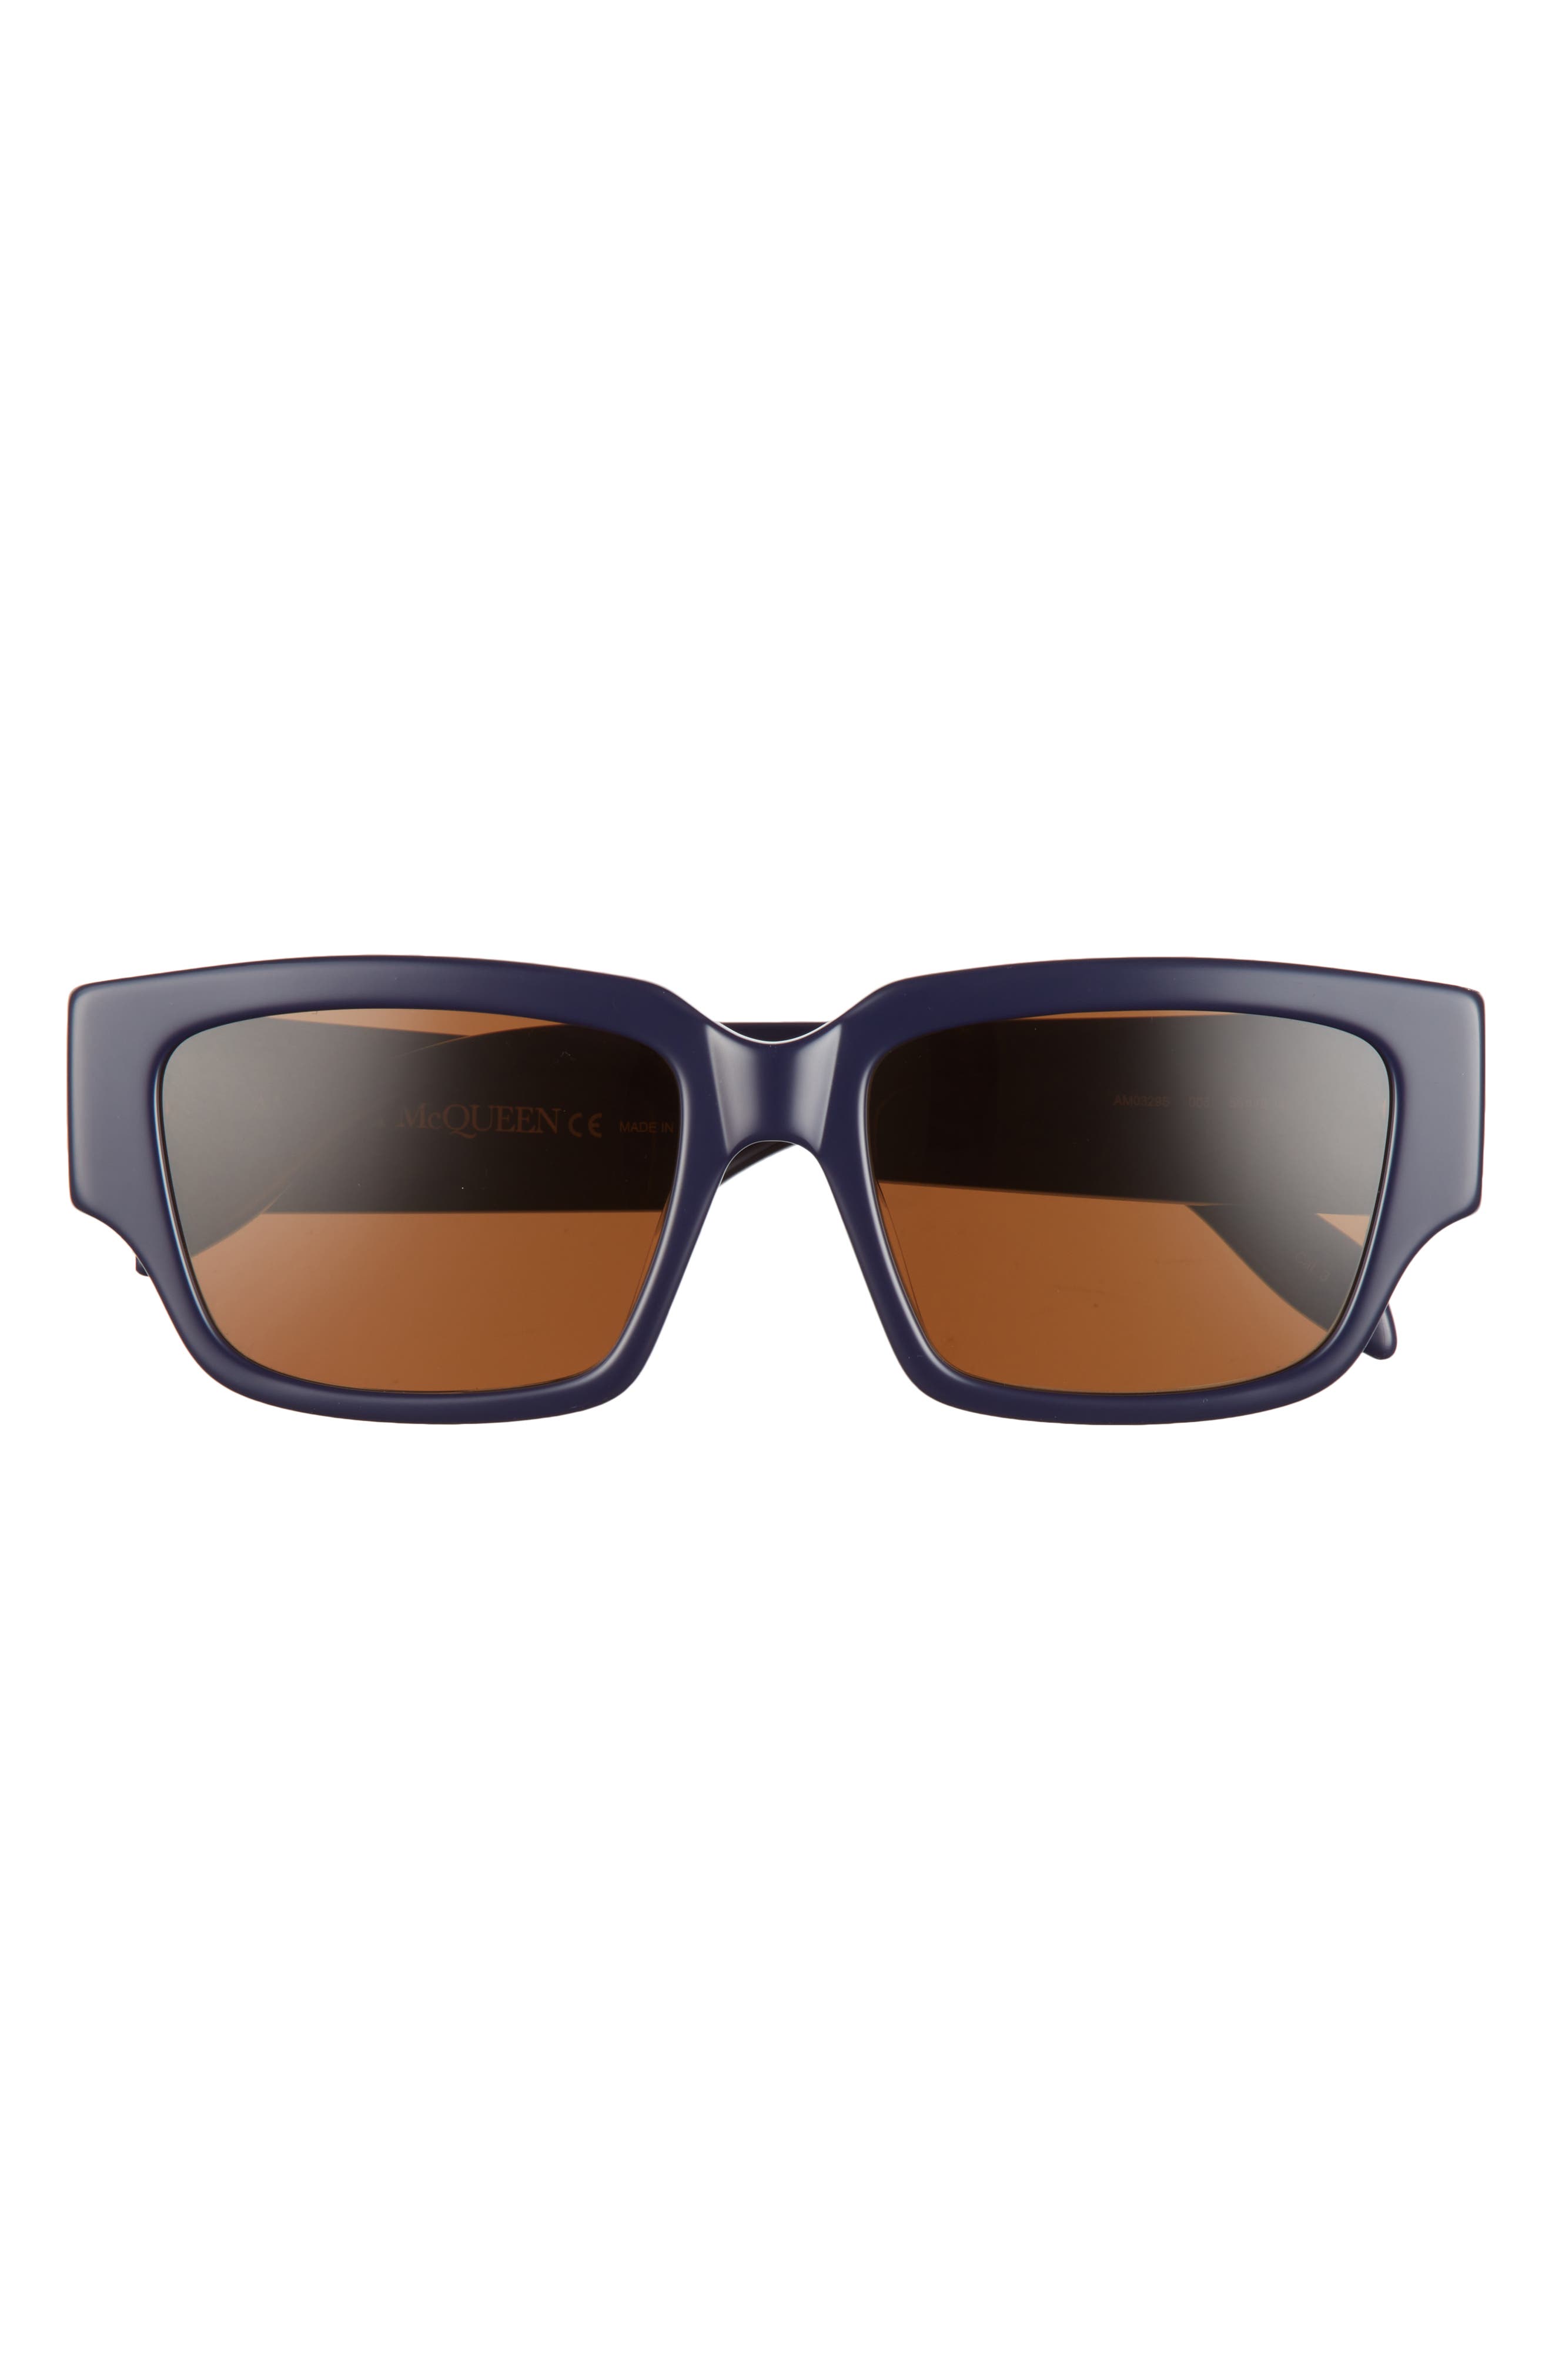 Alexander McQueen 56mm Rectangle Sunglasses in Blue at Nordstrom